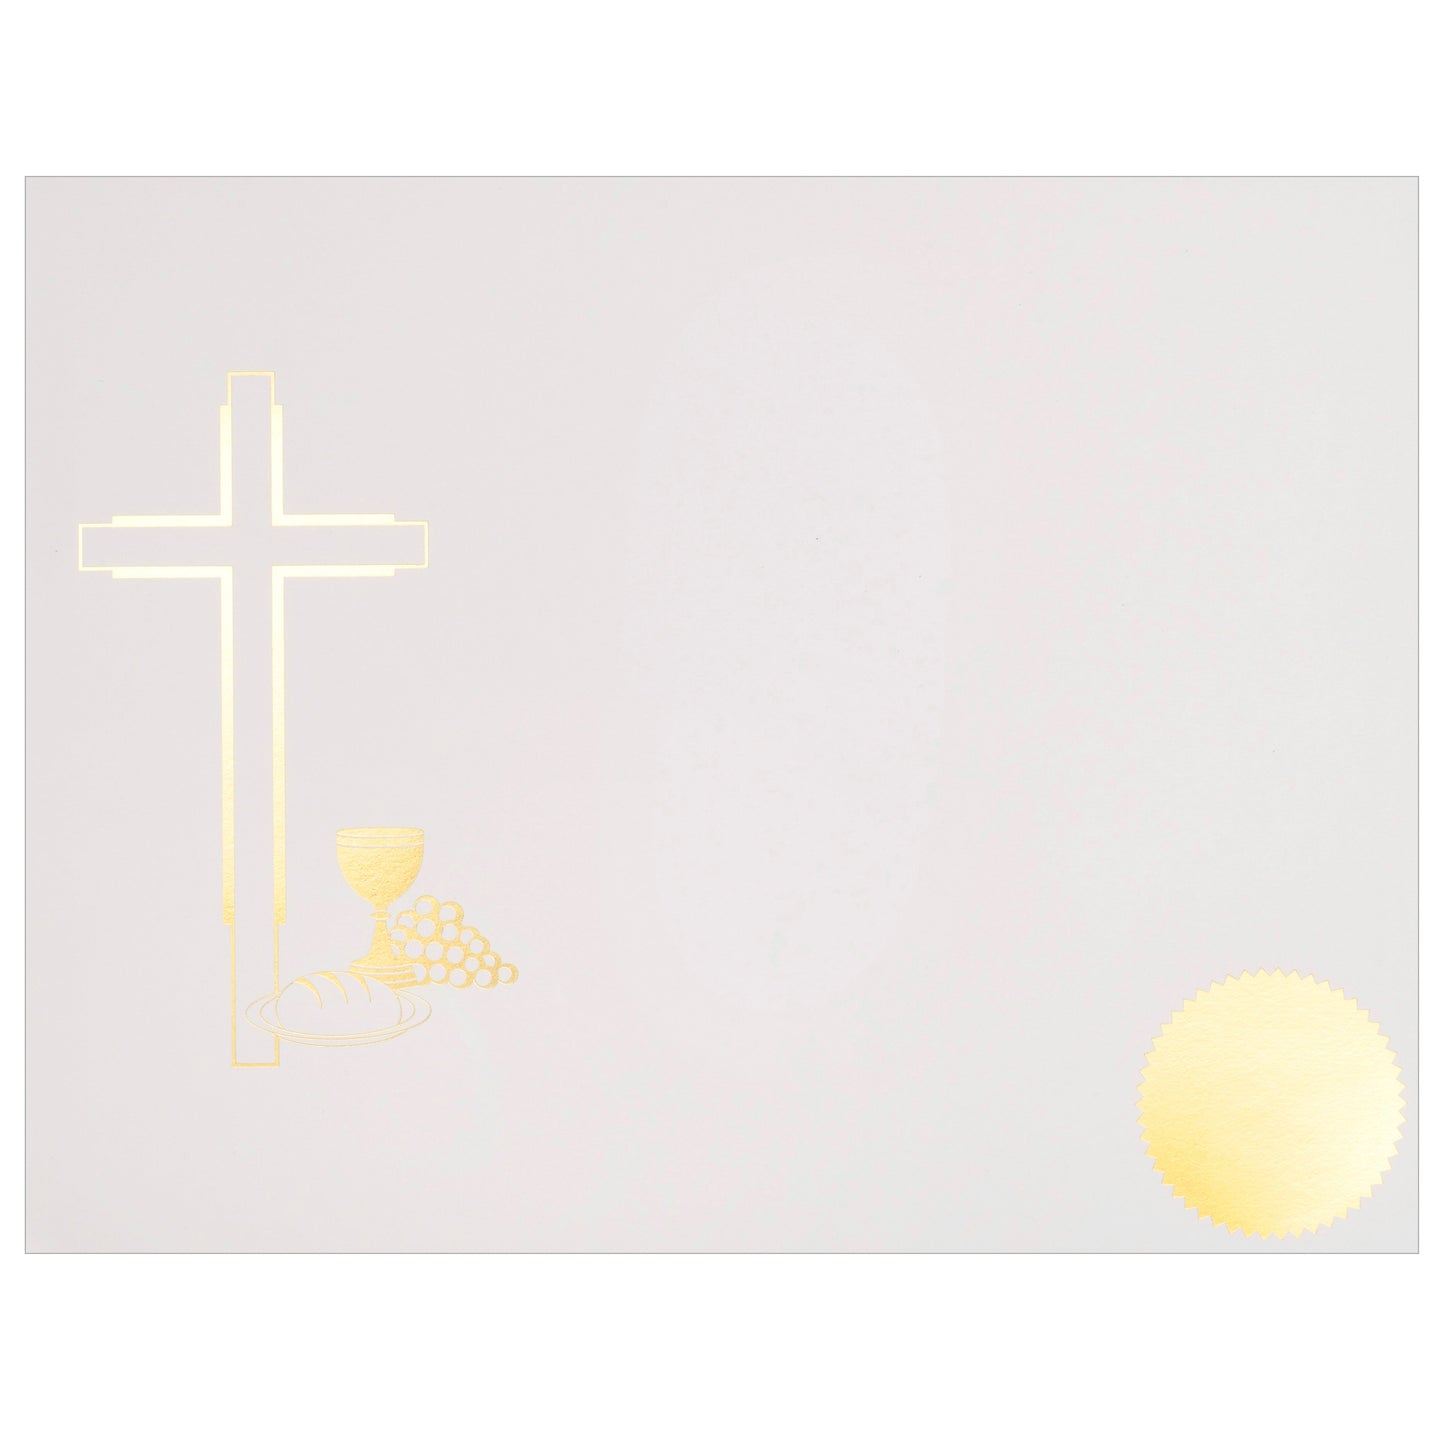 St. James® Religious Certificates - First Communion Certificates, Gold Foil, White Card Stock, Pack of 50